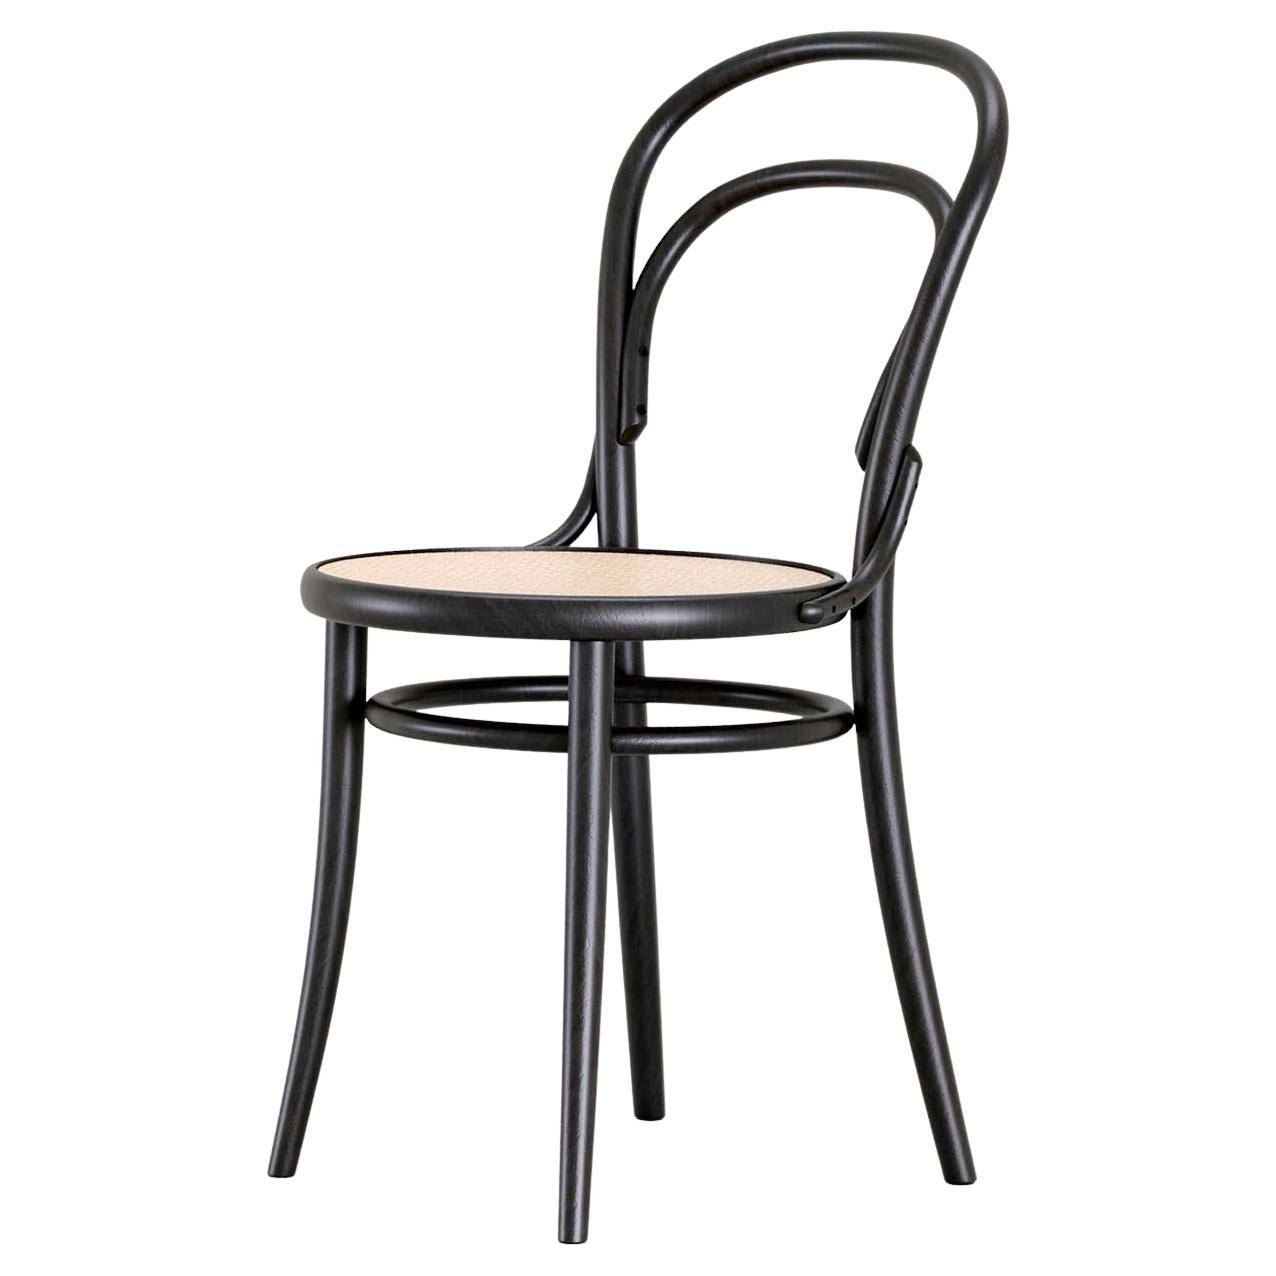 Contemporary Bistro Chair No. 14 by Ton, Black Beech and Cane Seat